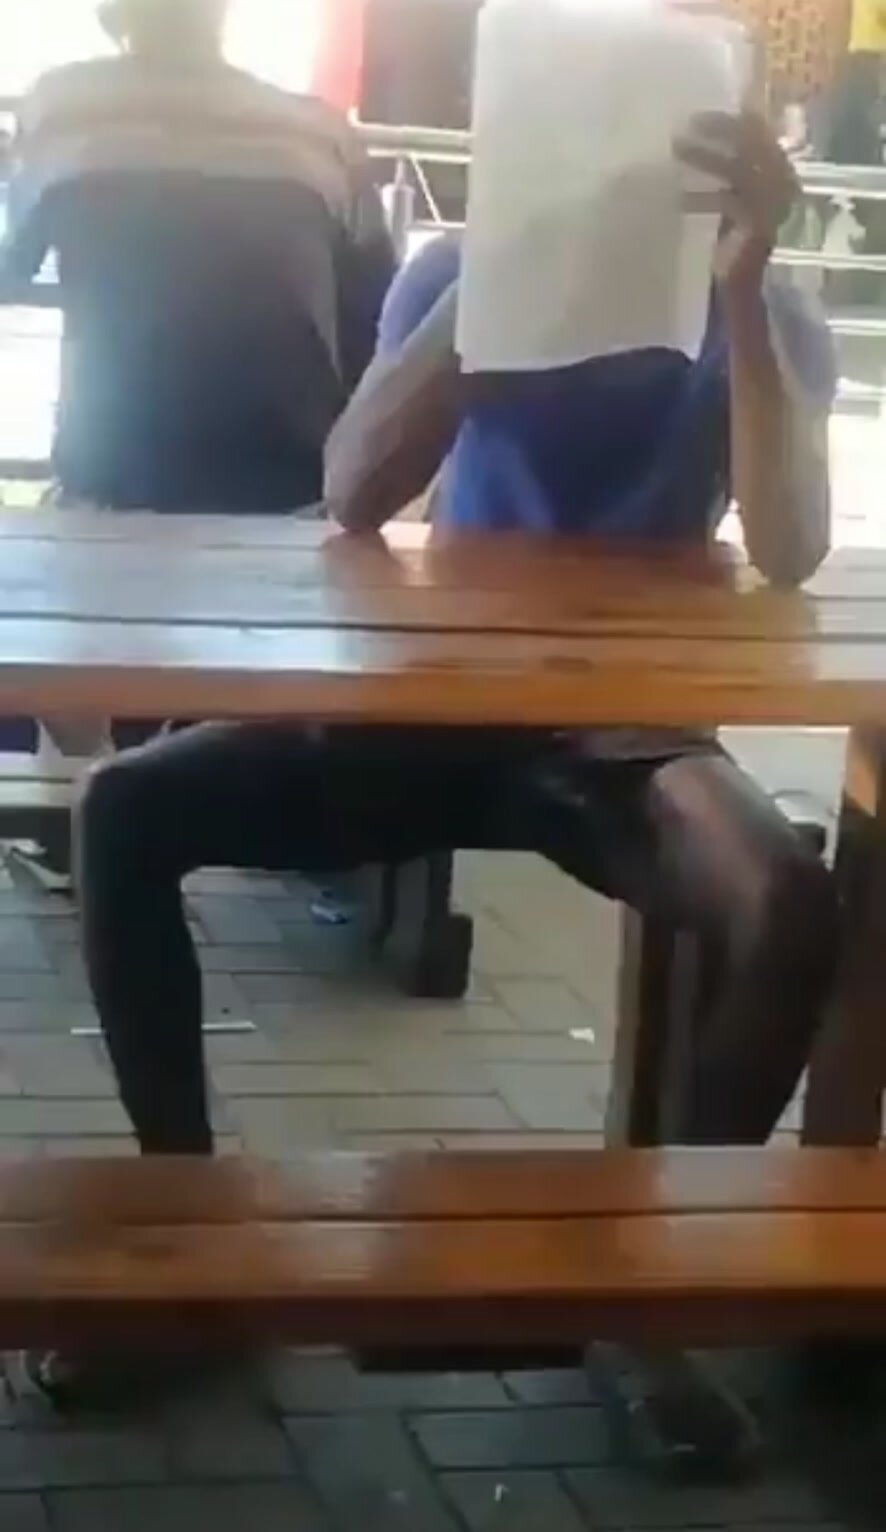 Showing off his rock hard dick in public